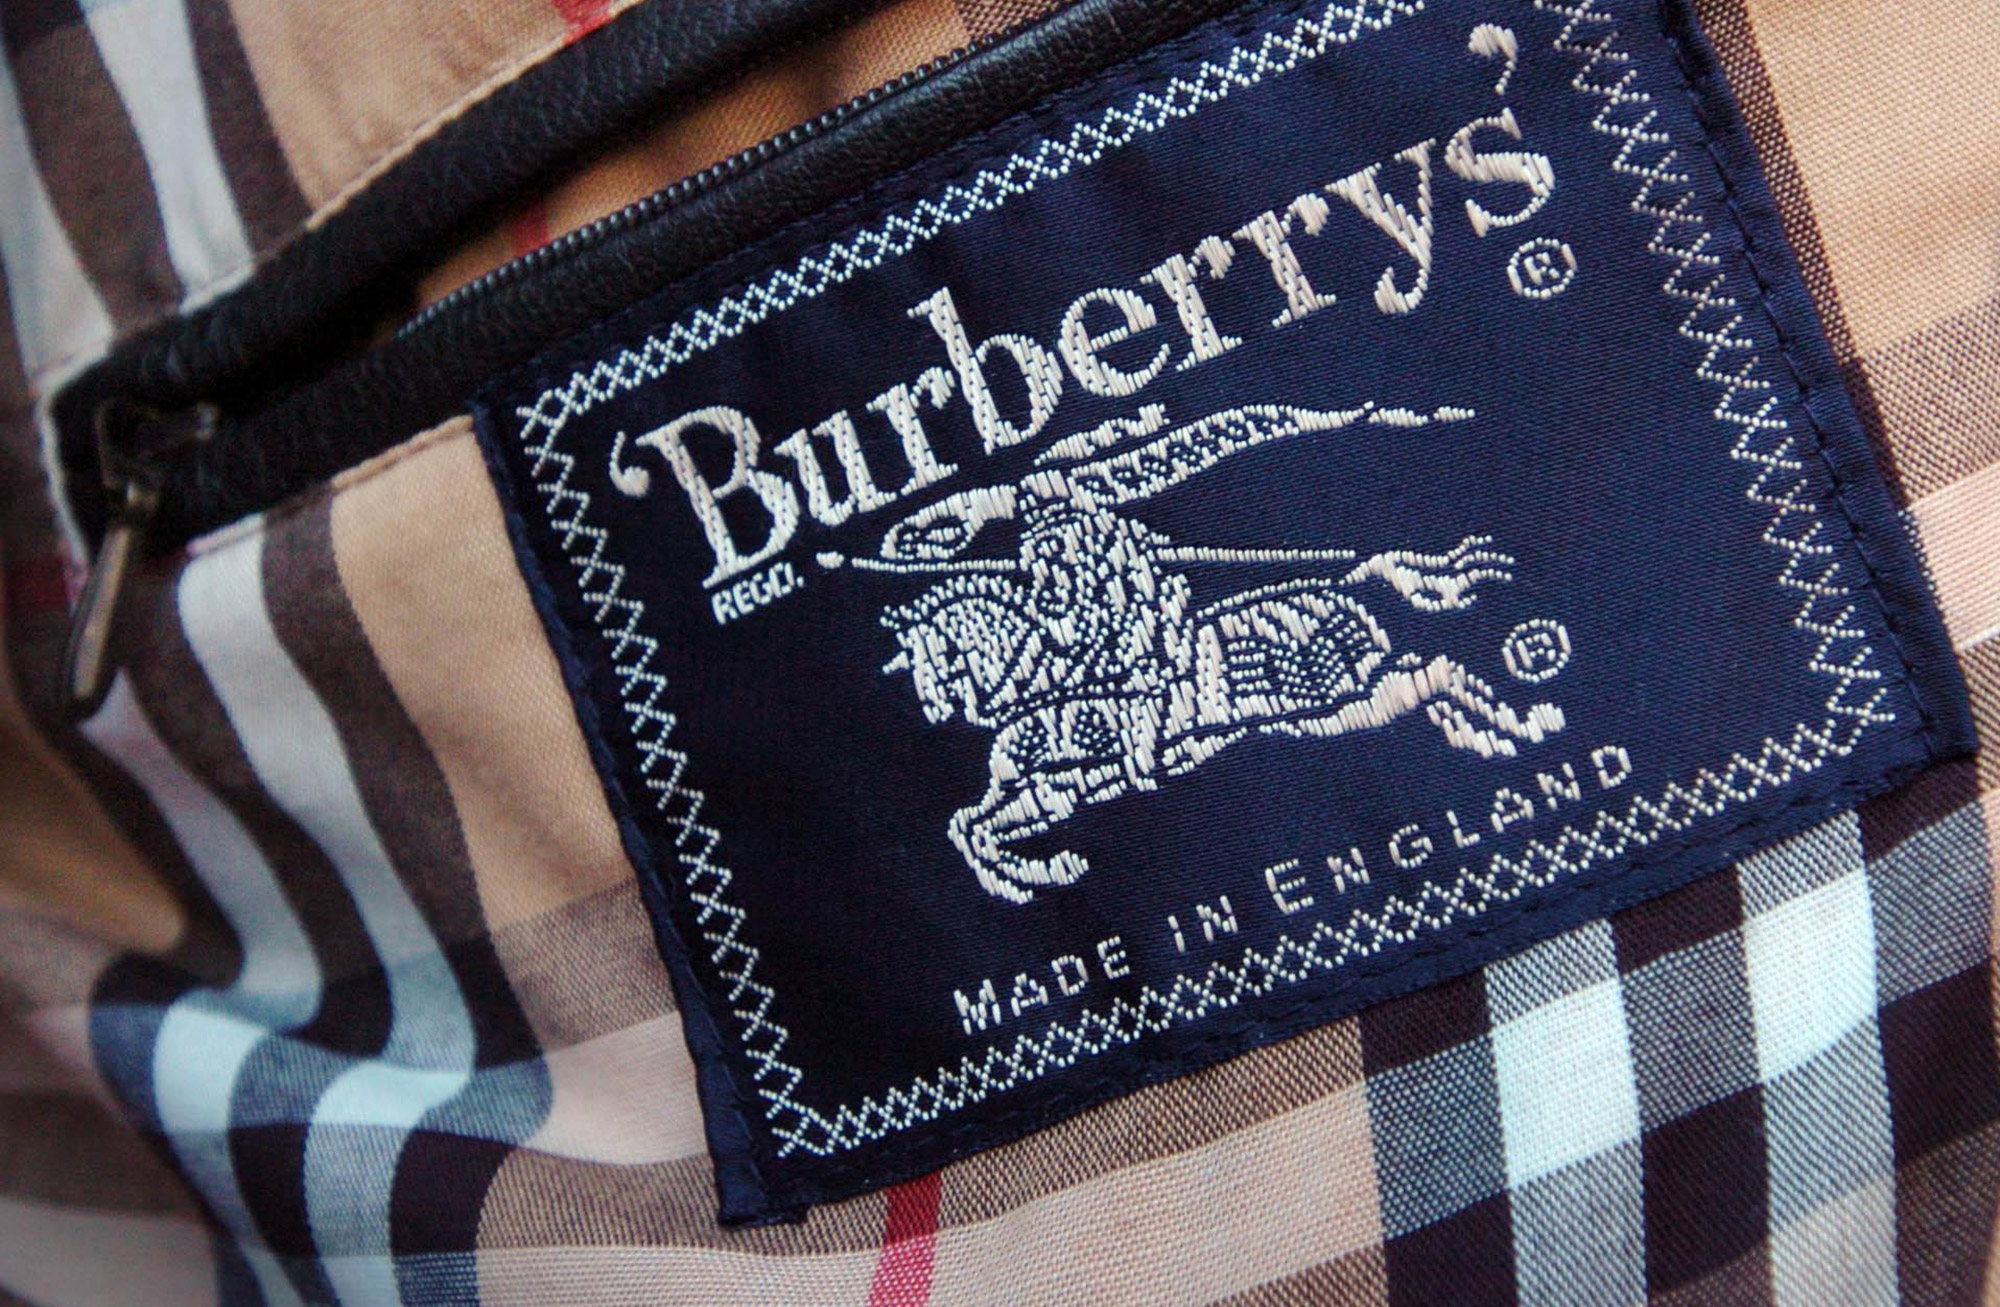 Vintage Burberry Shirts. Online Now.